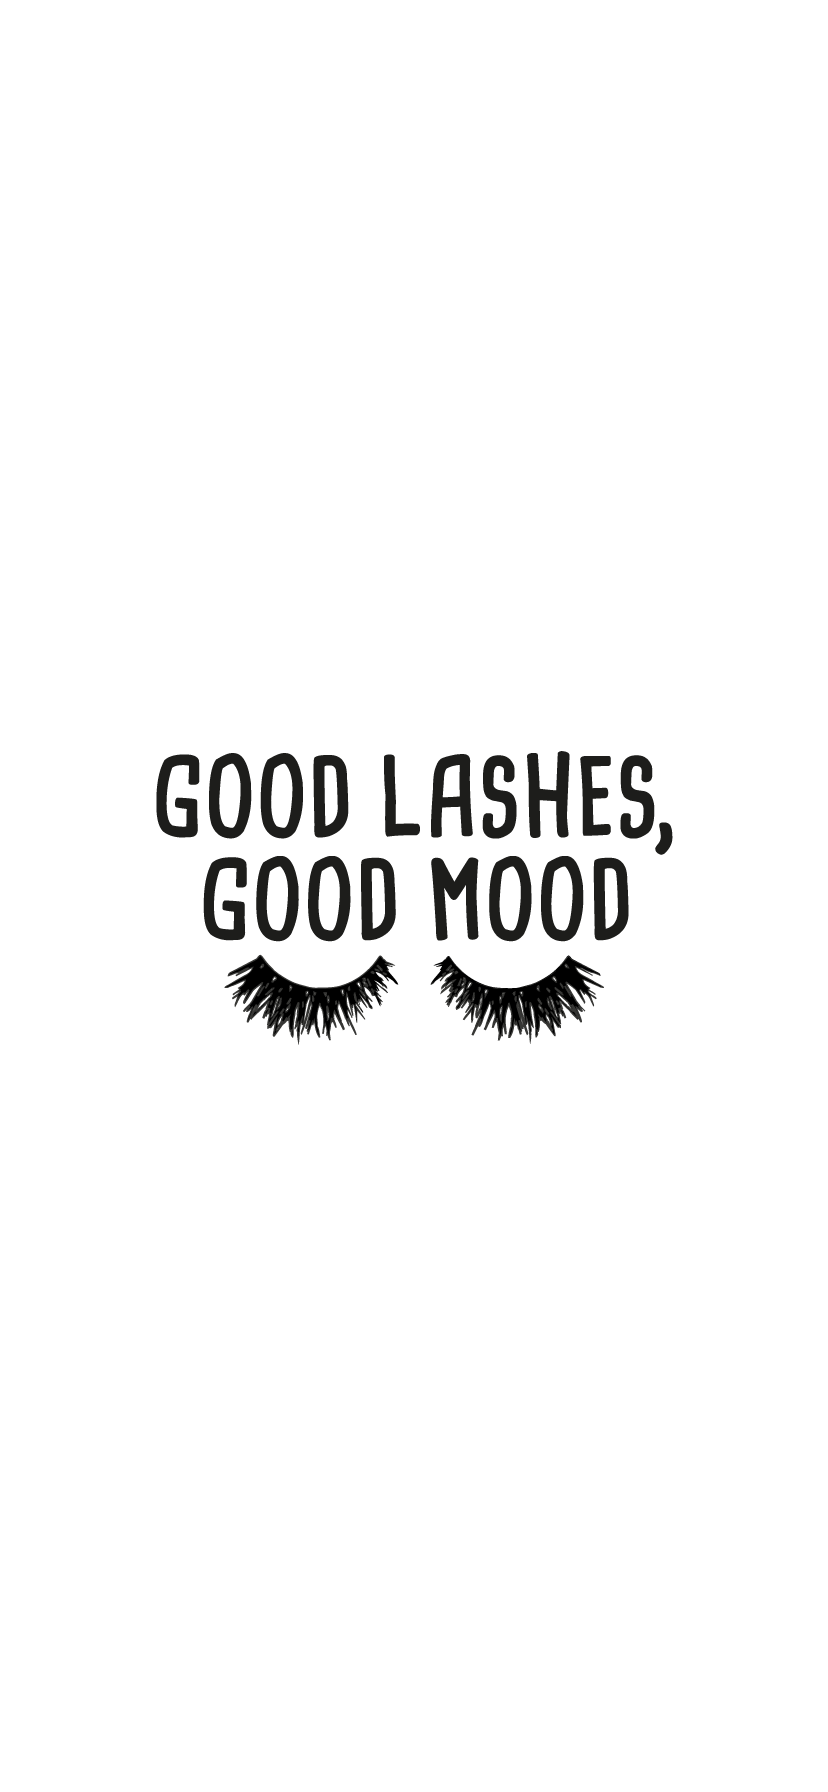 Good Lashes Mood Quote iPhone Xr Wallpaper Background